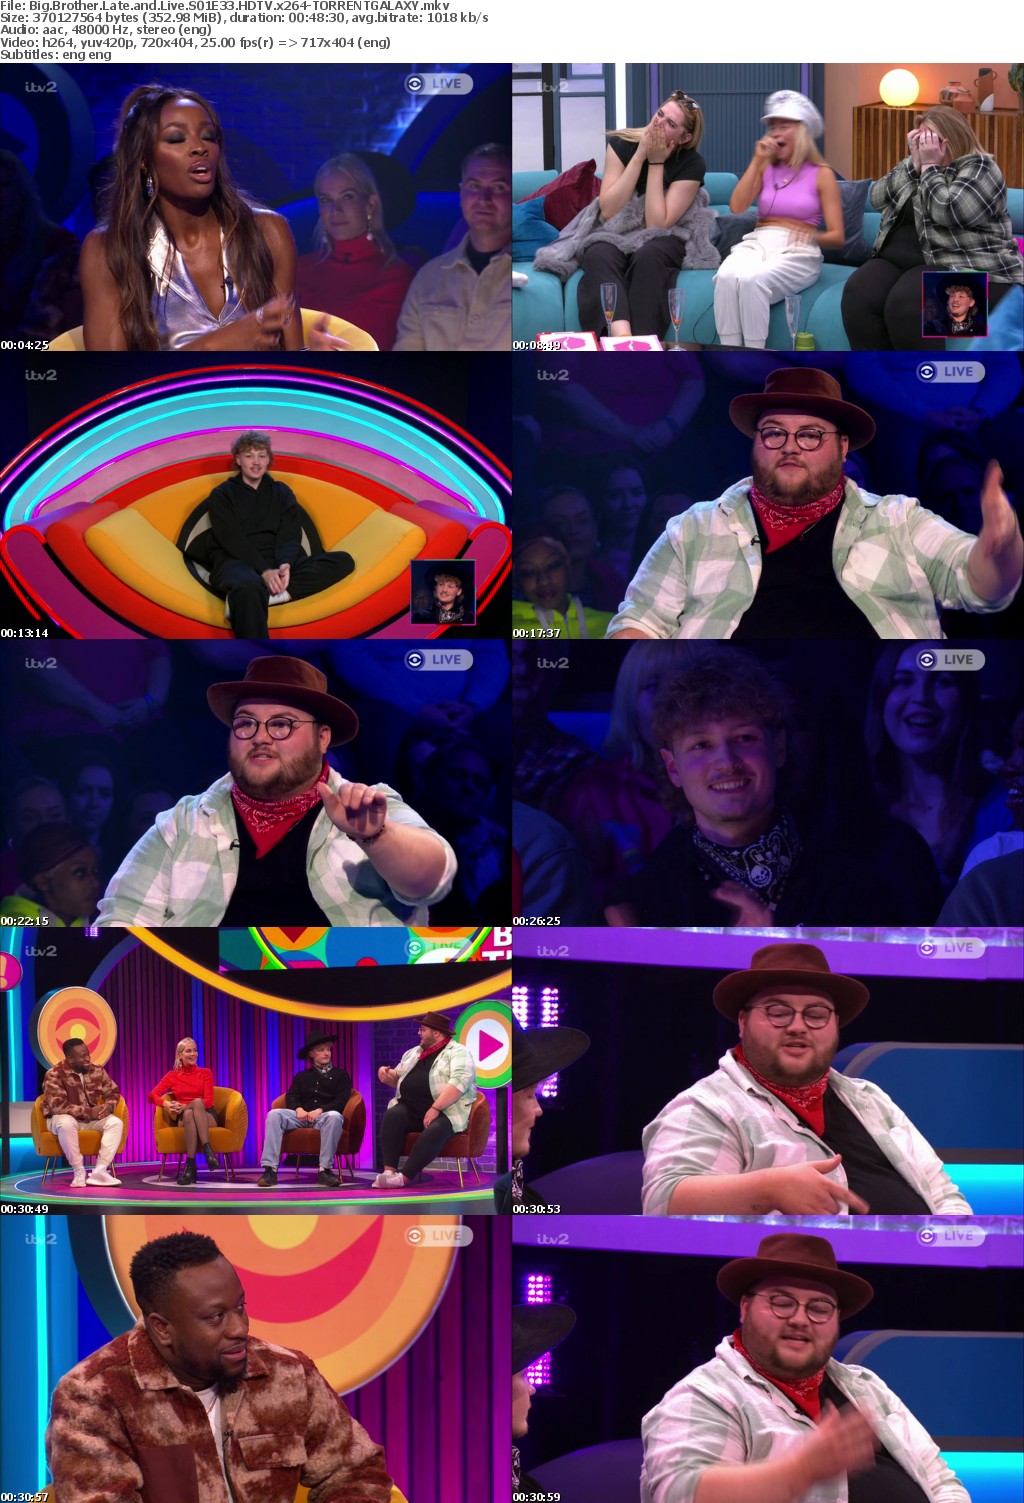 Big Brother Late and Live S01E33 HDTV x264-GALAXY